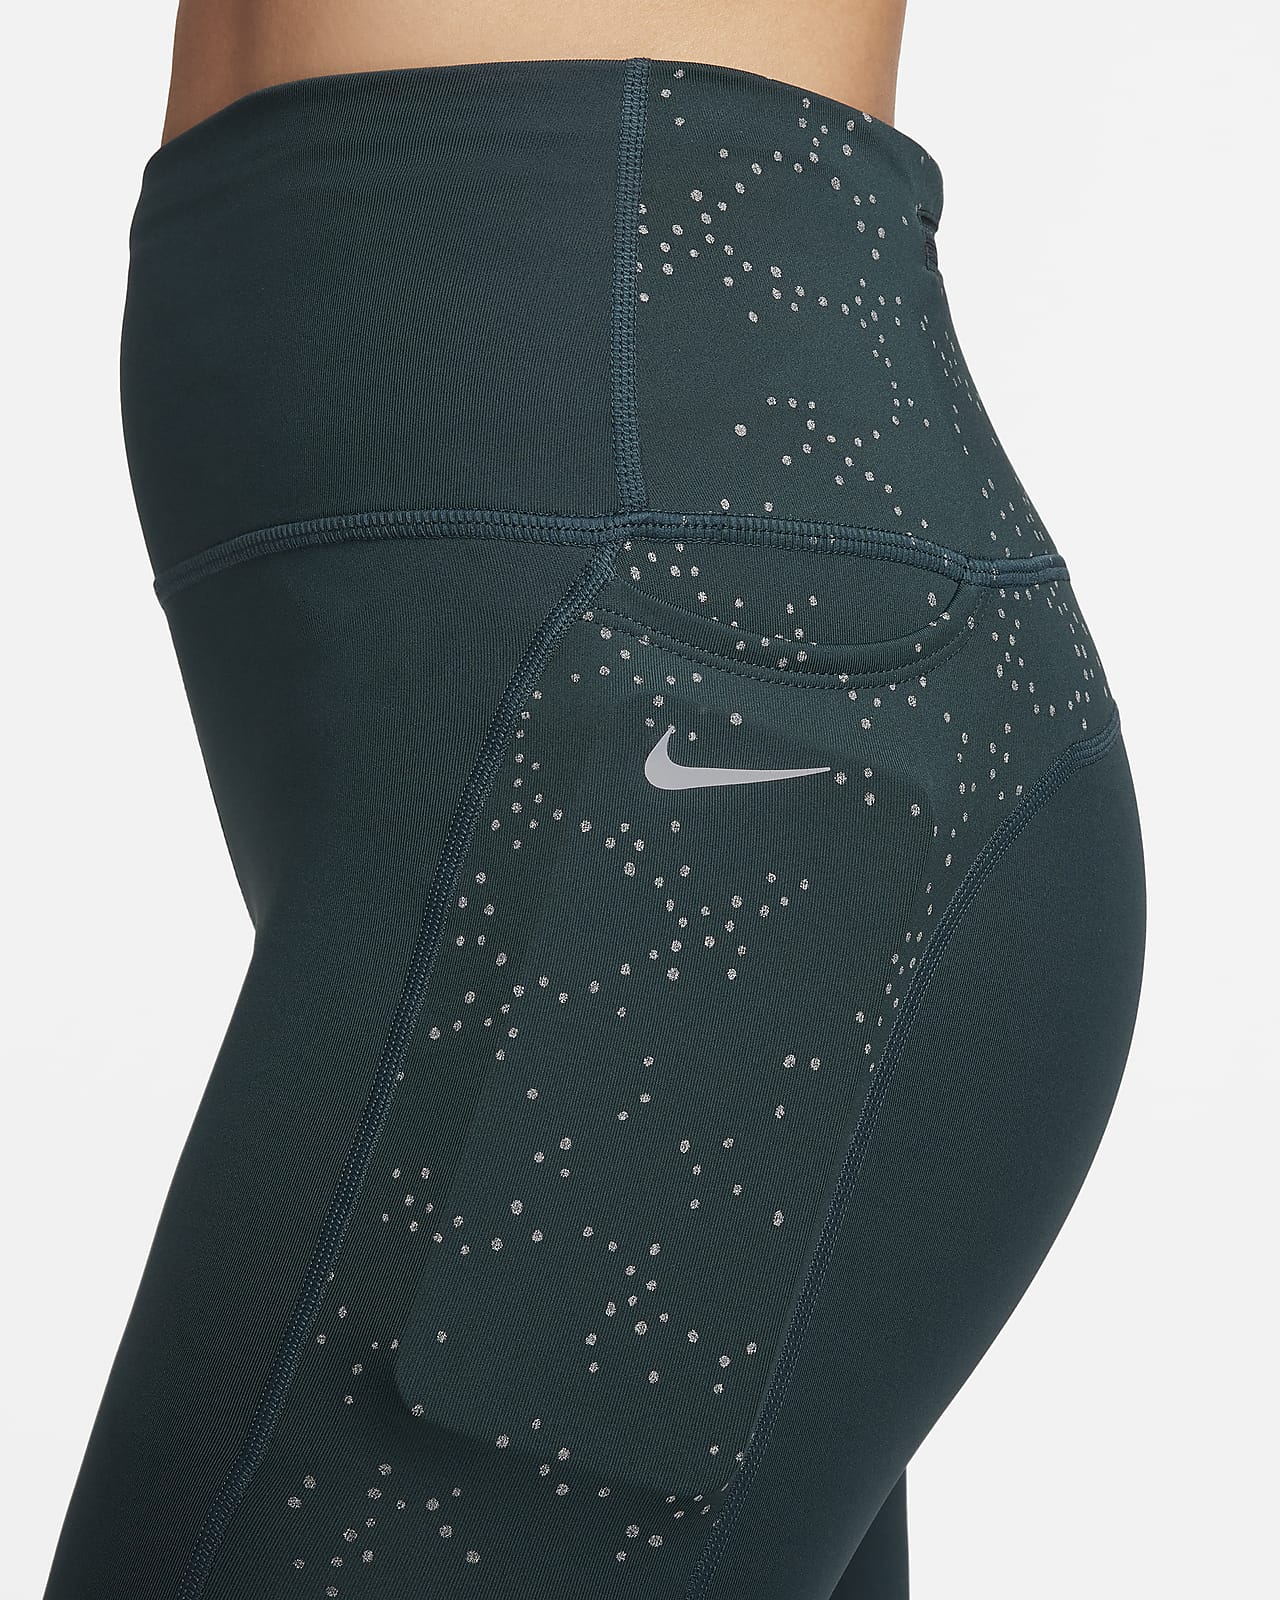 Nike Pro 365 Women's Mid-Rise 7/8 Leggings with Pockets